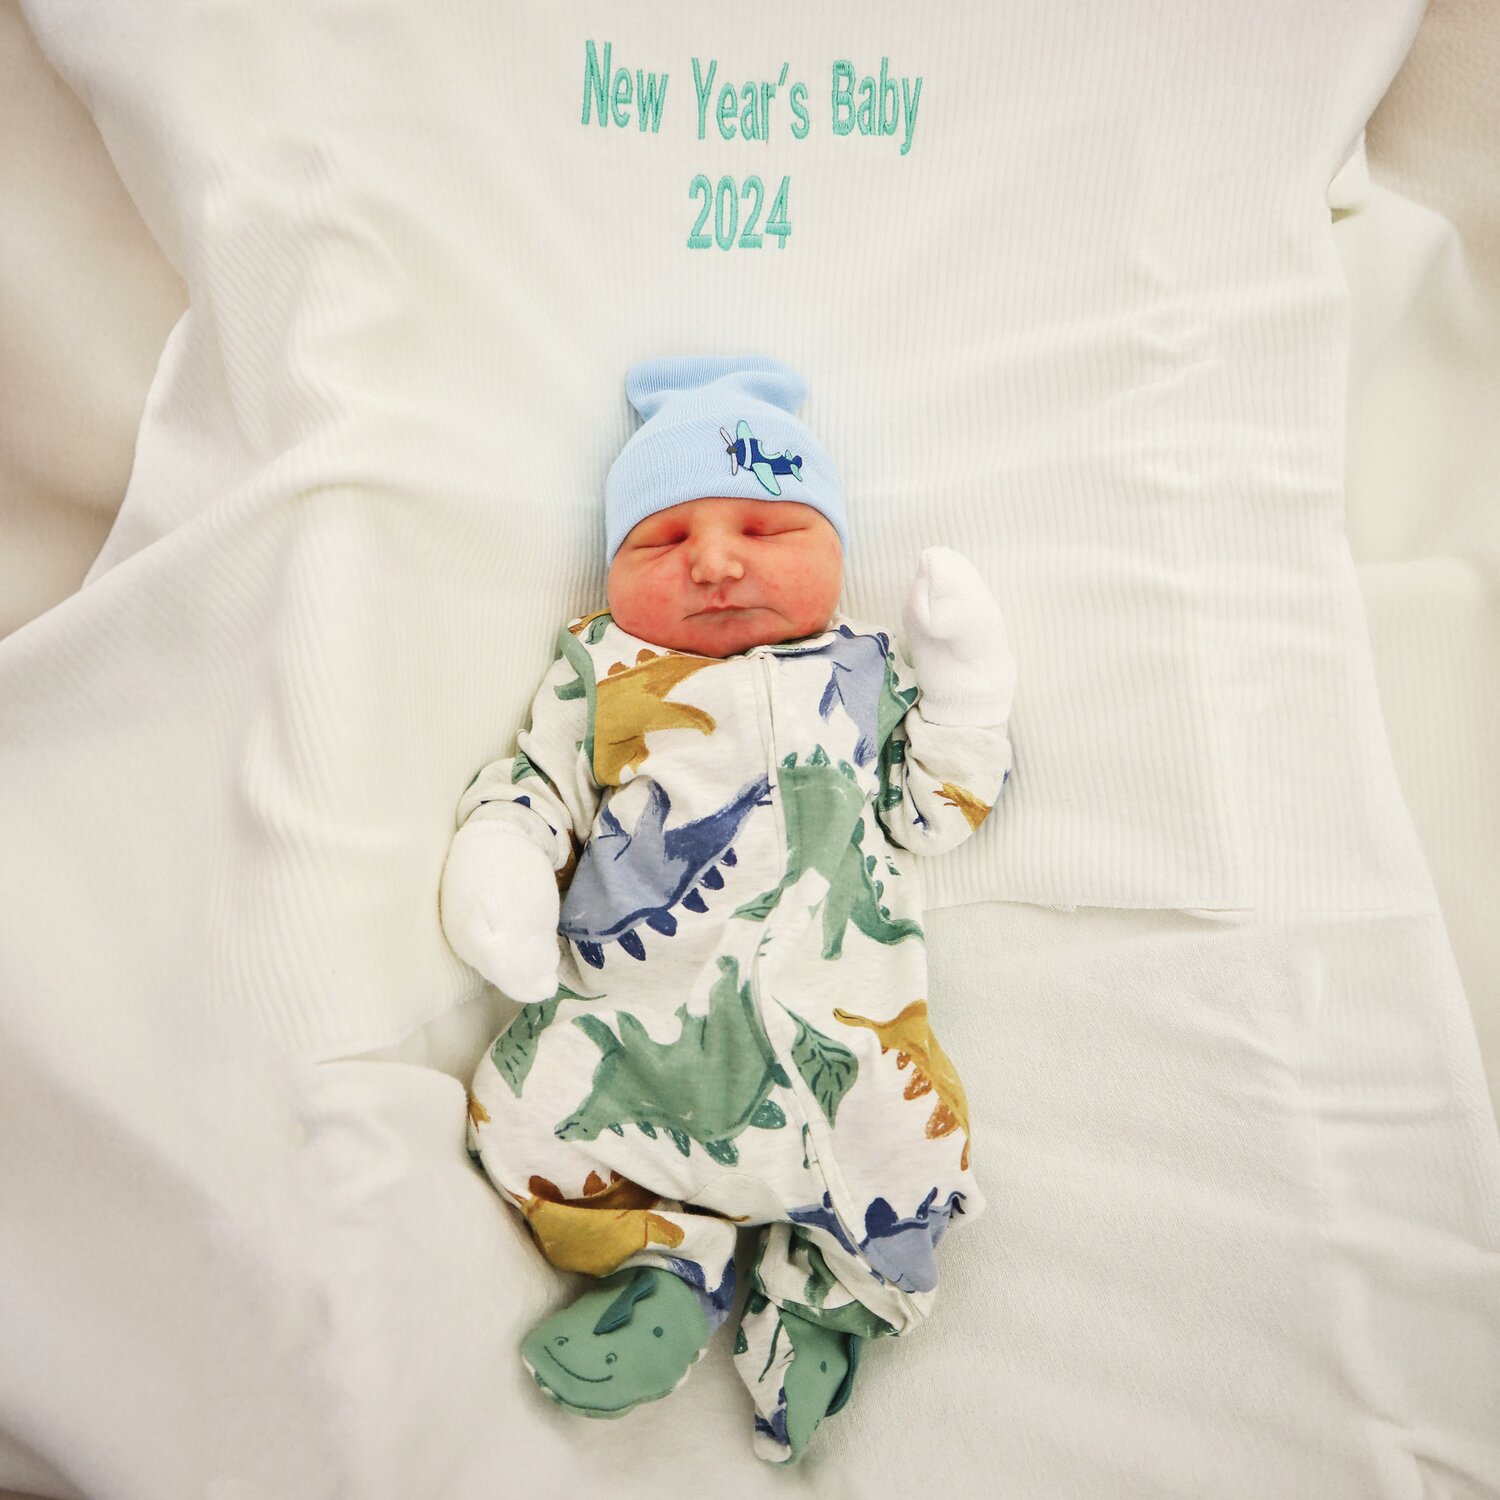 Rex Gawel was the first baby of the year born at Grand View Hospital in West Rockhill. He greeted the world — and parents Shannon Ritter and Matthew Gawel — at 9:48 a.m. Jan. 2, weighing in at 9 pounds,15 ounces and 22 inches in length.